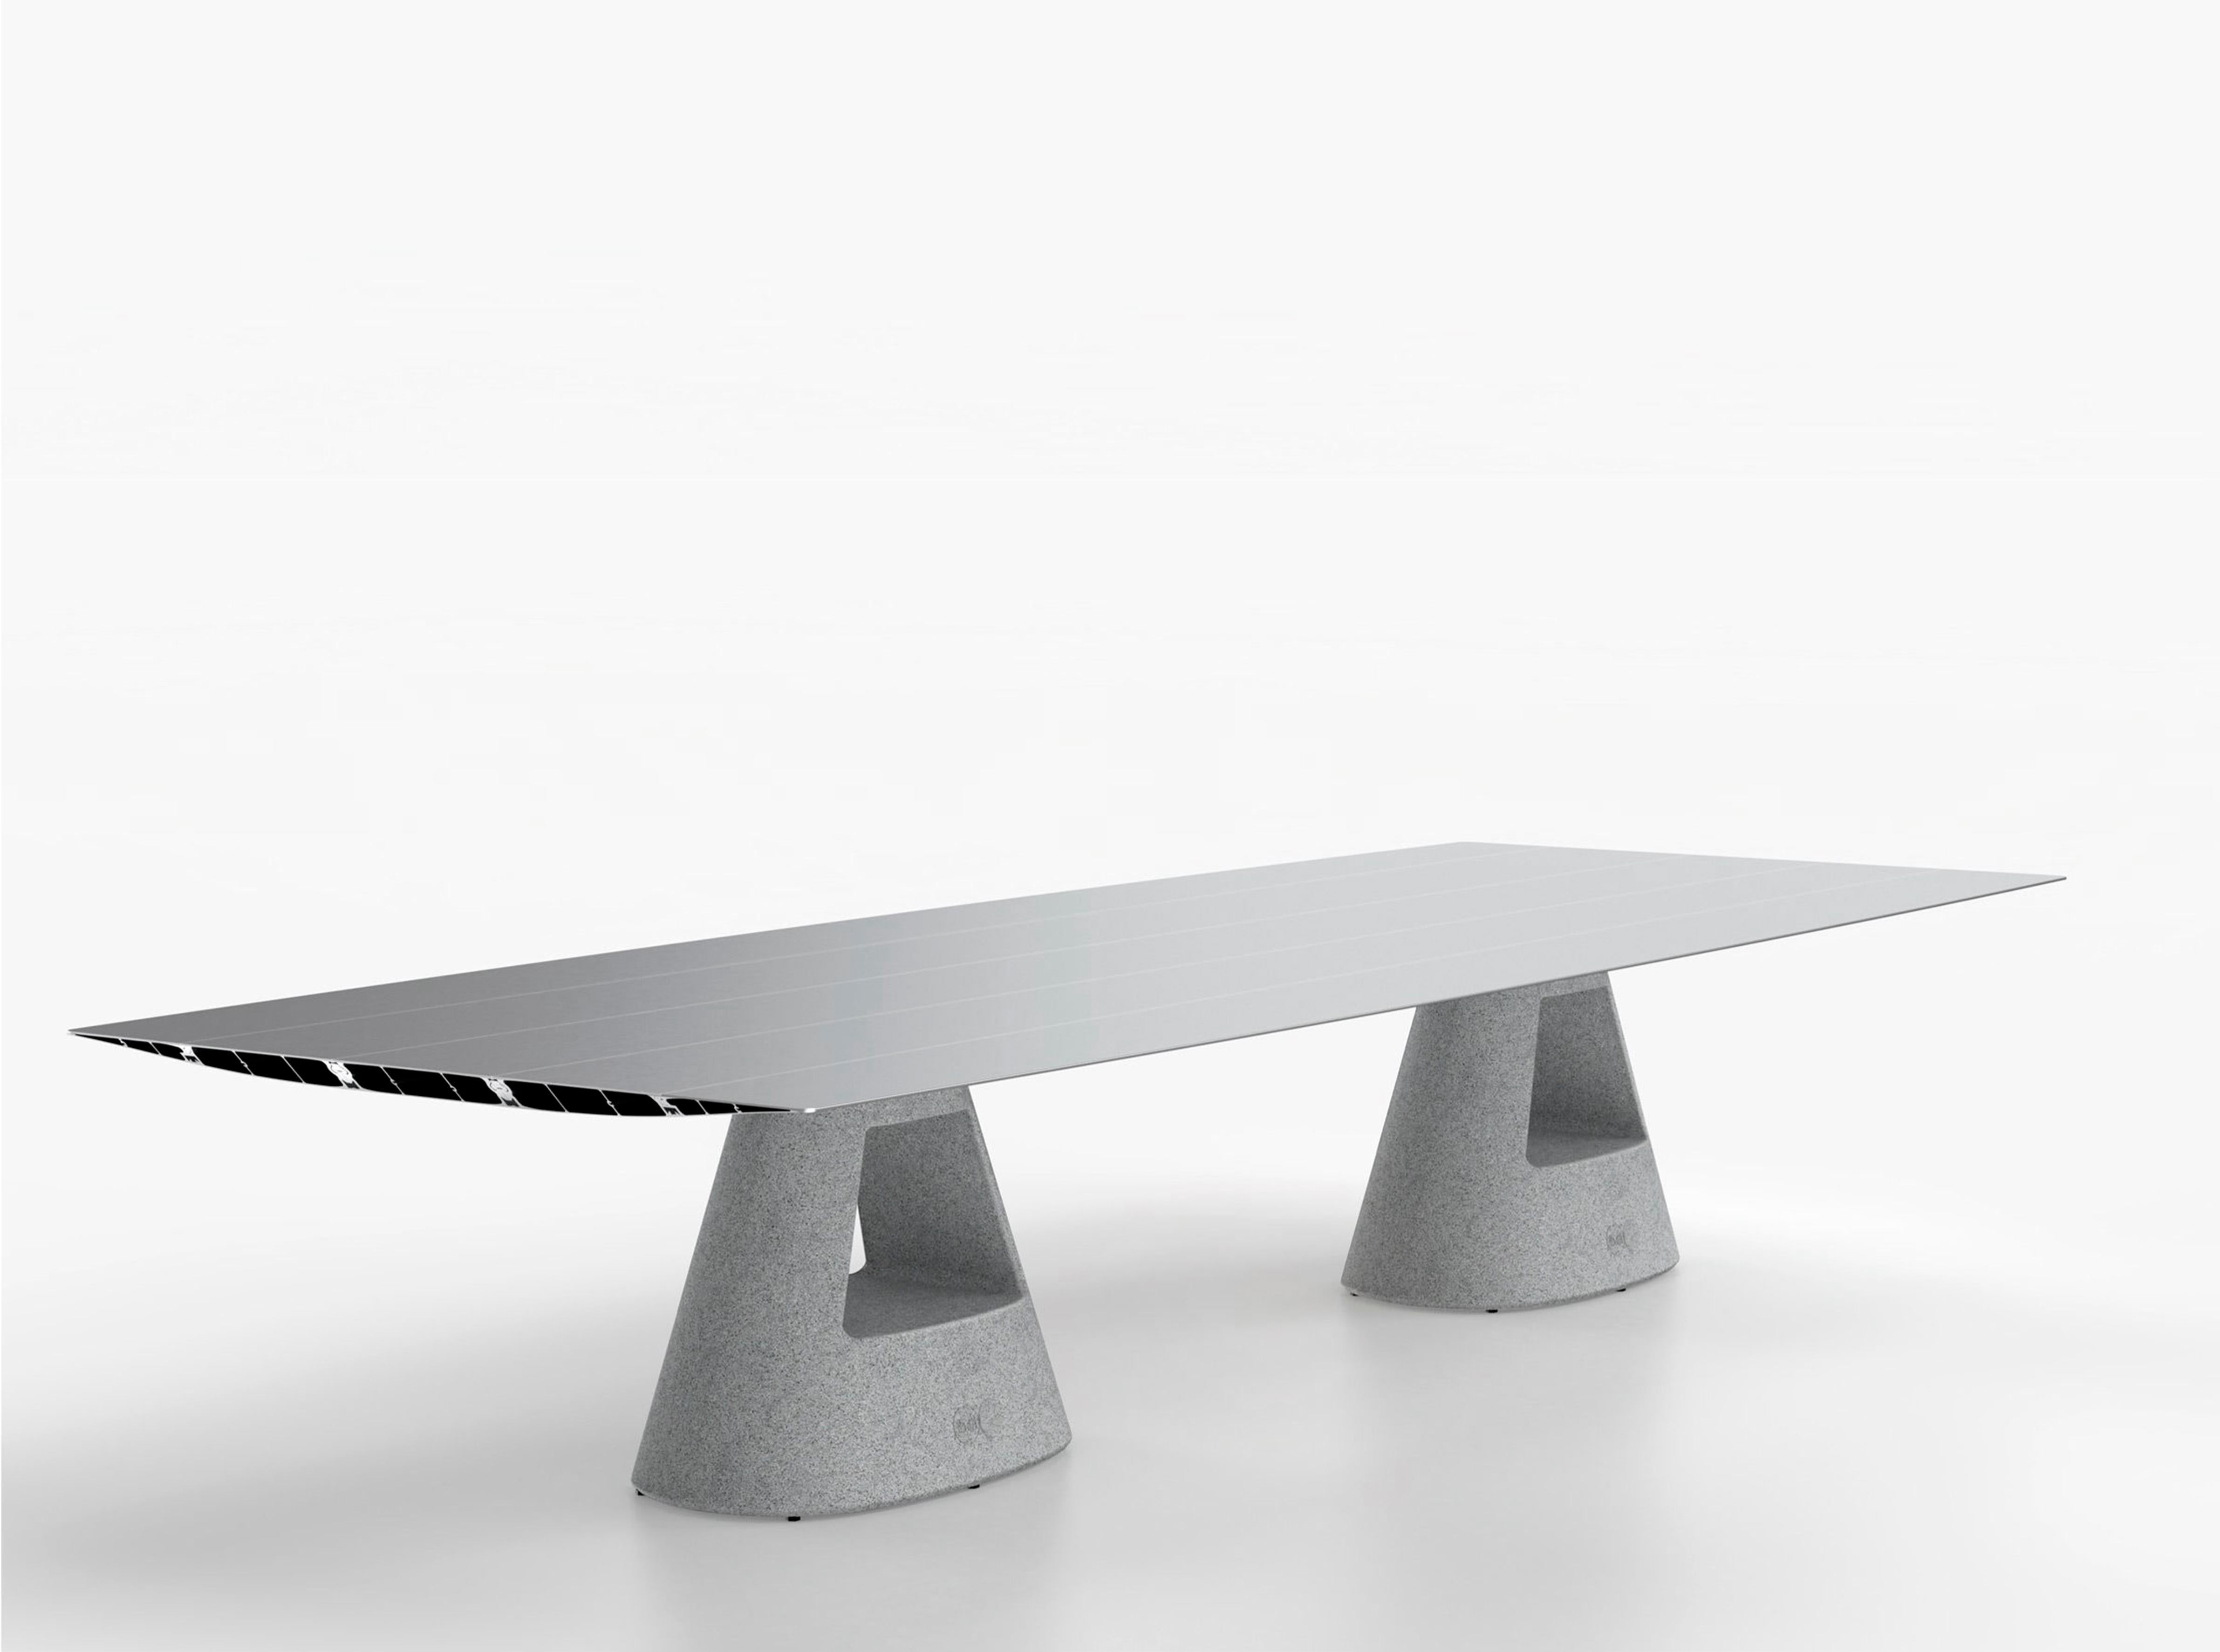 B-150 Table, in extrusioned aluminium with a grey architectural concrete base. 

Designed by Konstantin Grcic in 2021, manufactured by BD Barcelona.

Konstantin Grcic opened the Extrusions collection with the Table B, in 2009. Grcic has been